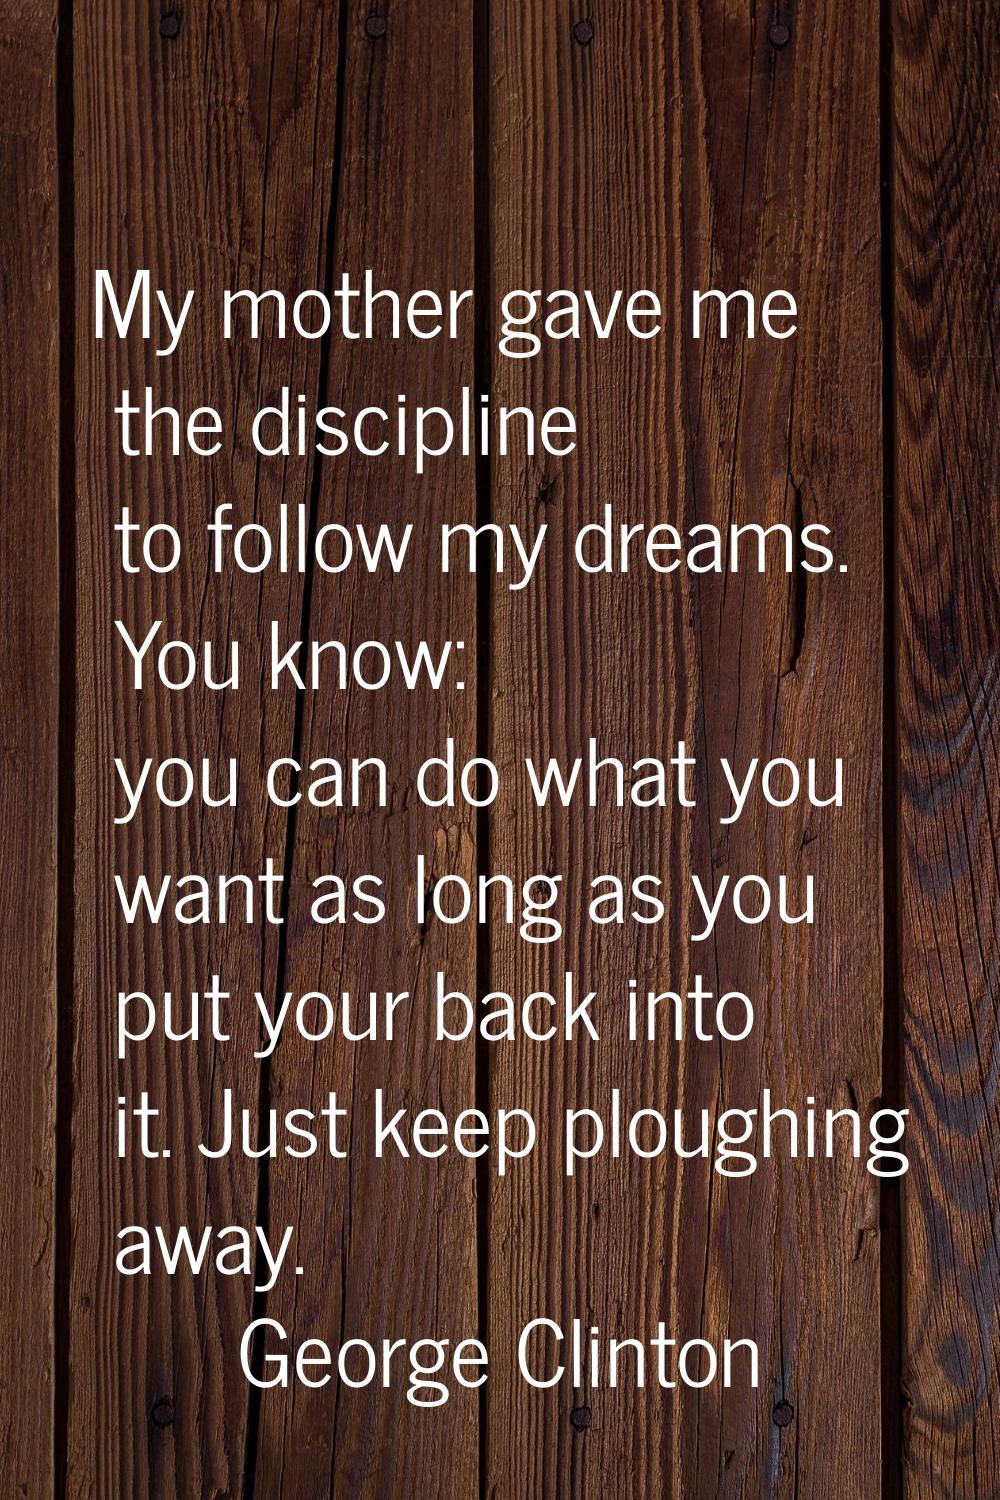 My mother gave me the discipline to follow my dreams. You know: you can do what you want as long as